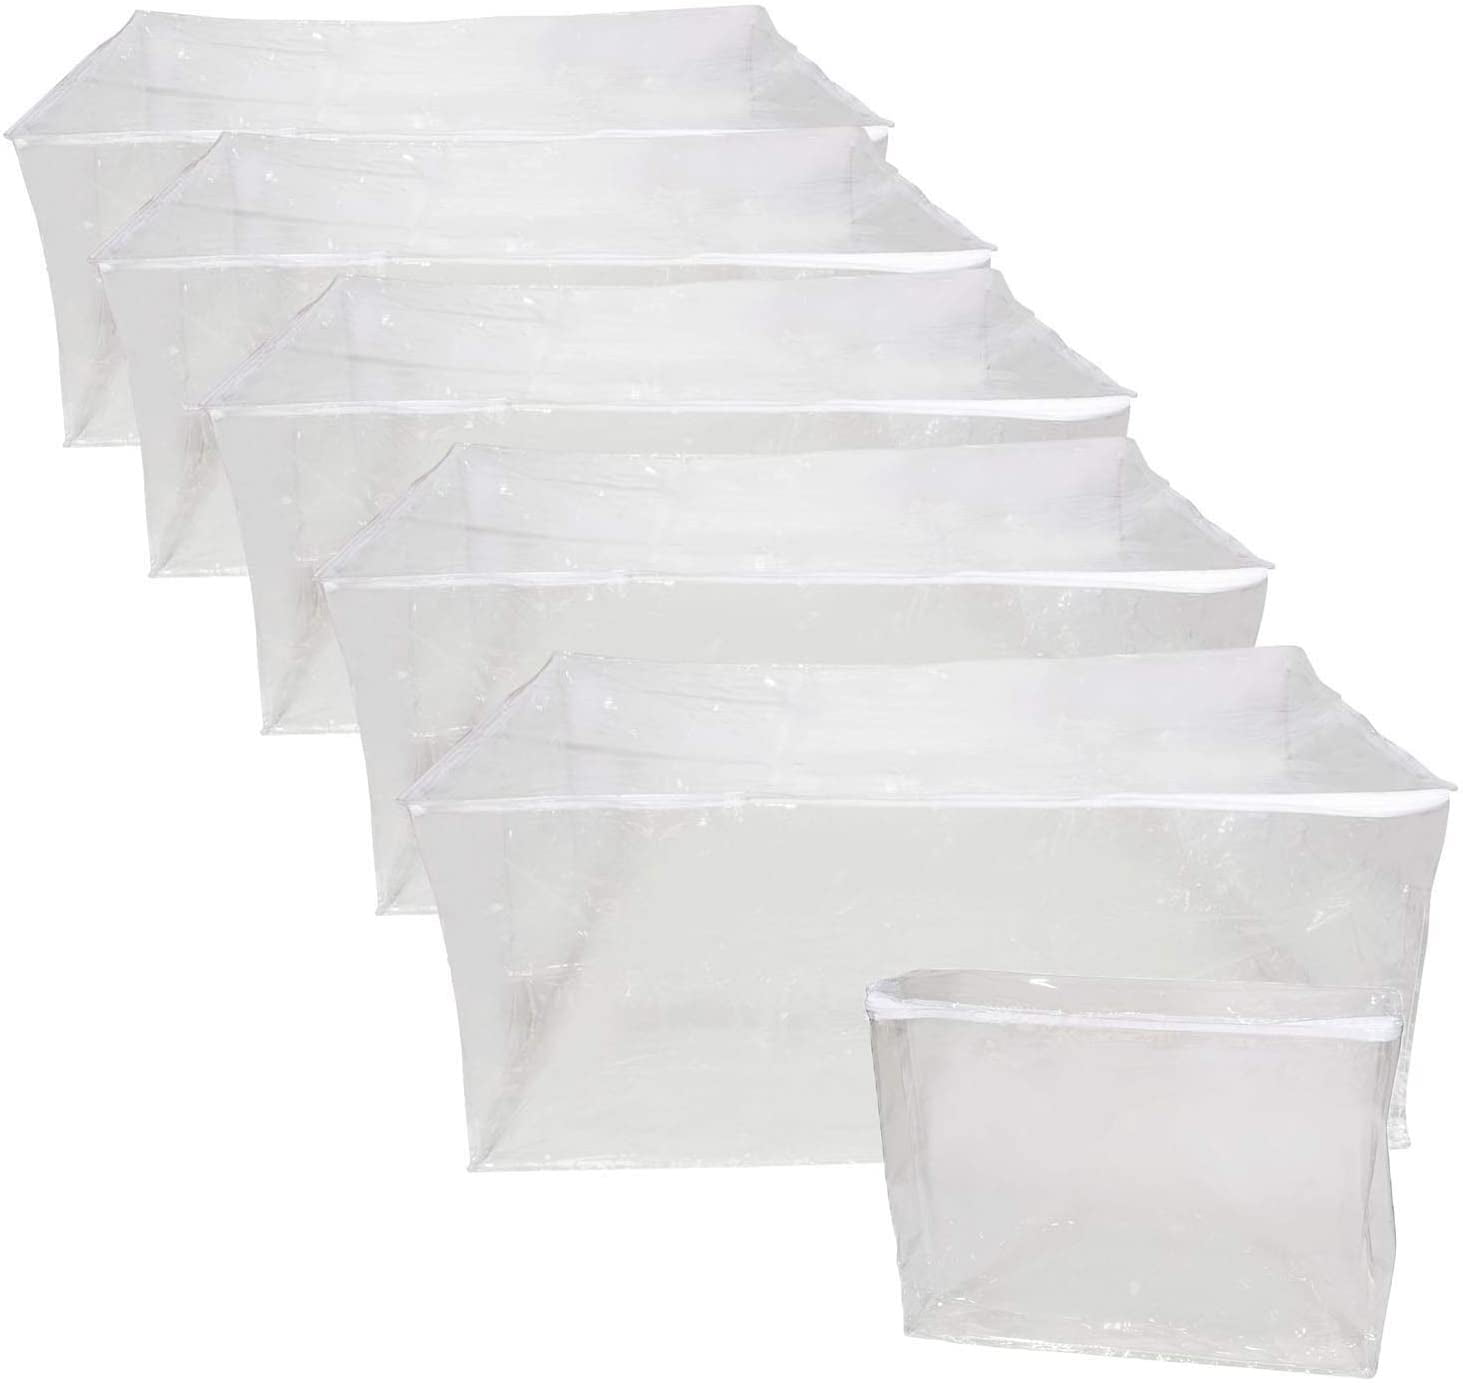 Clear Vinyl Zippered Sweater Storage Bags 17 x 20 x 10 Inch 5-Pack